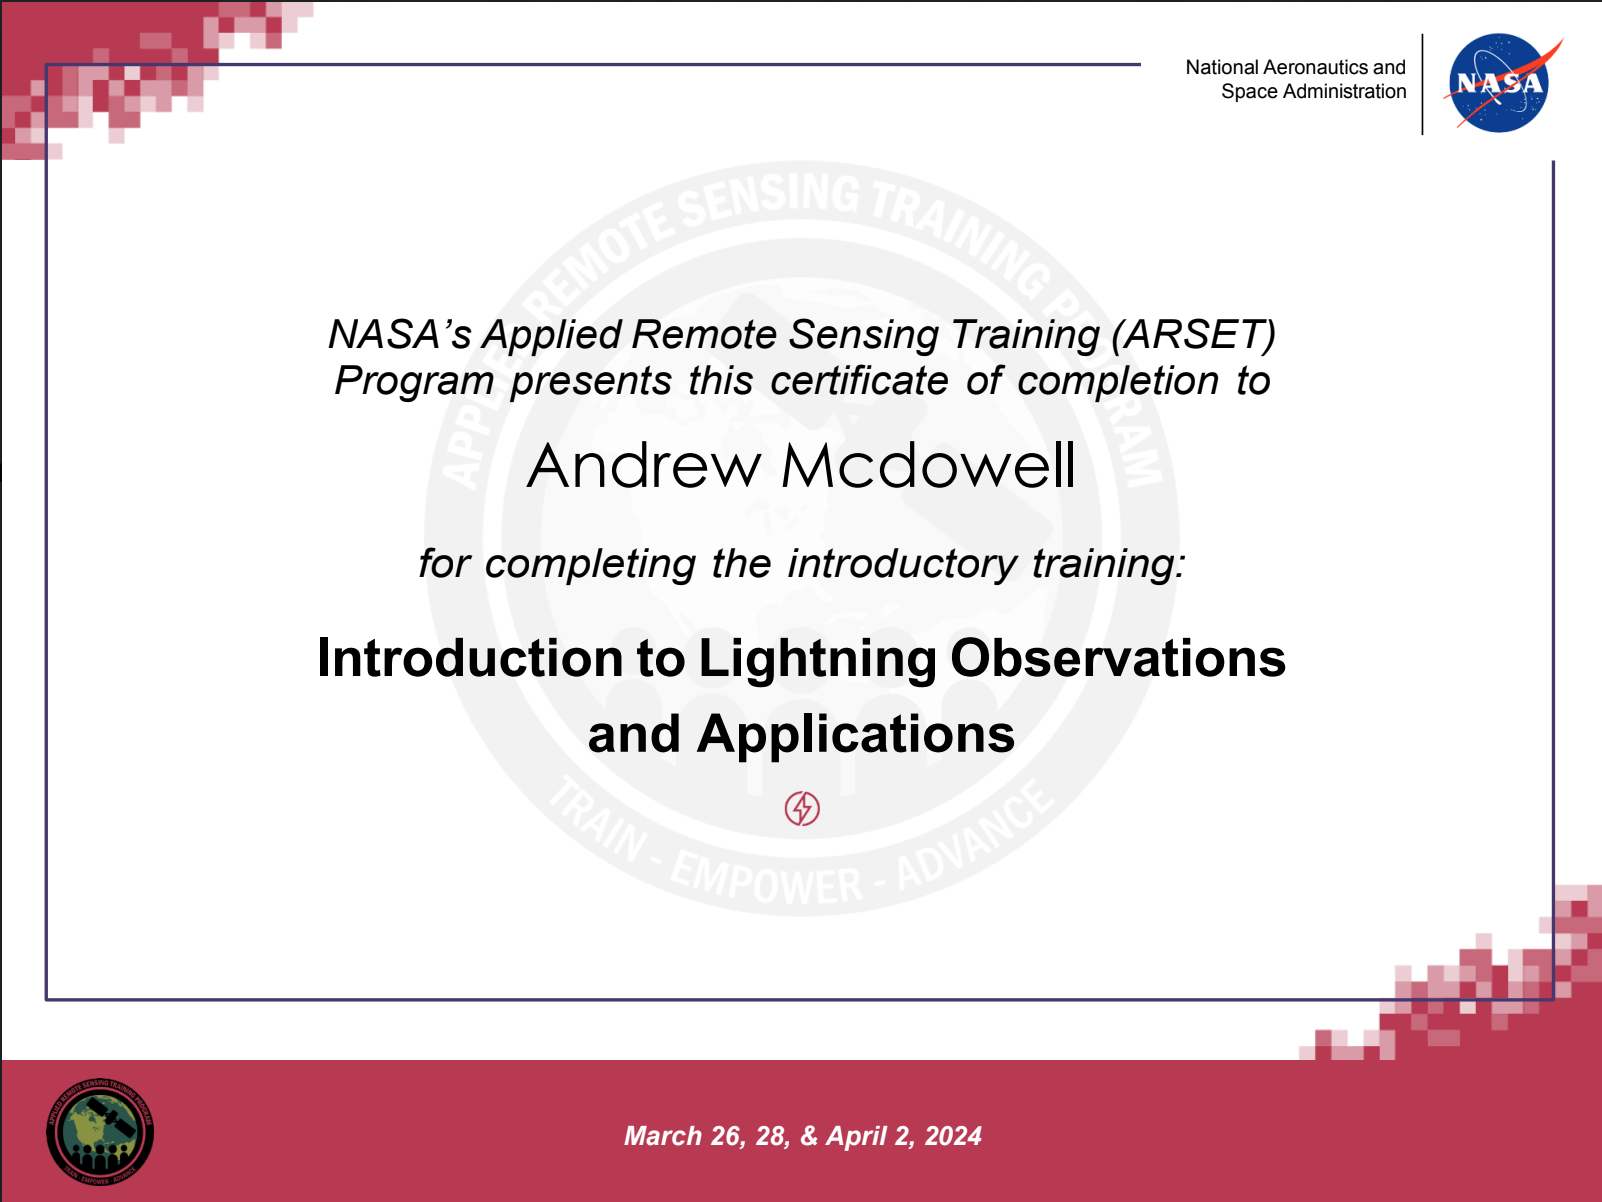 ARSET Introduction to Lightning Observations and Applications certificate